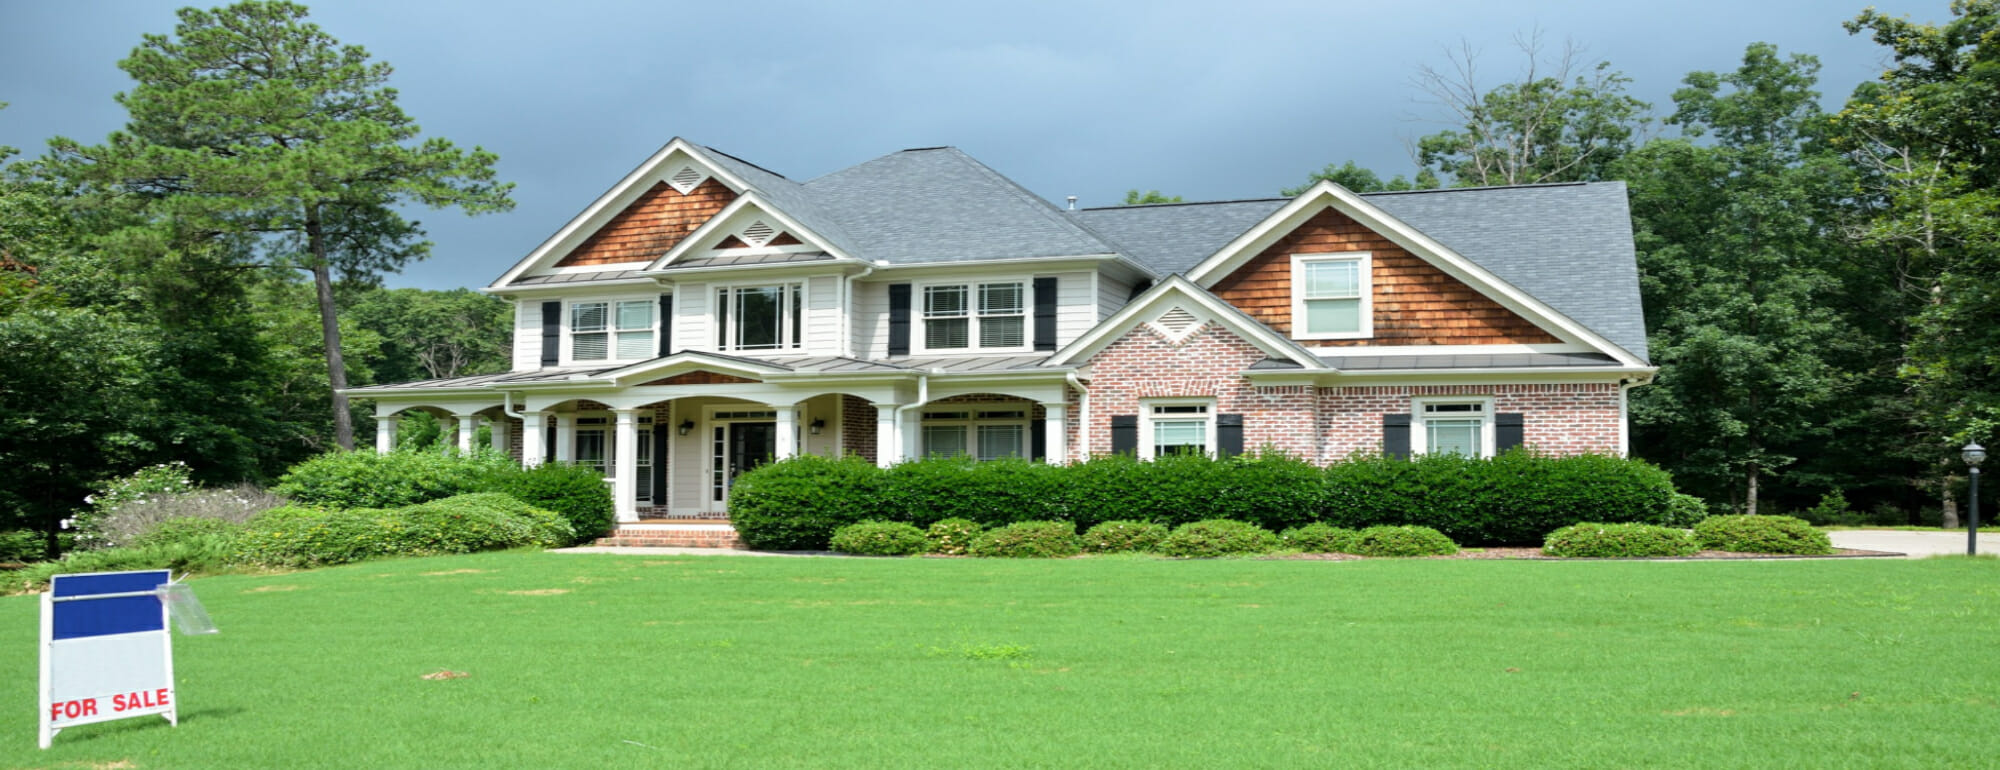 Top 3 Benefits of Owning Your Own Home